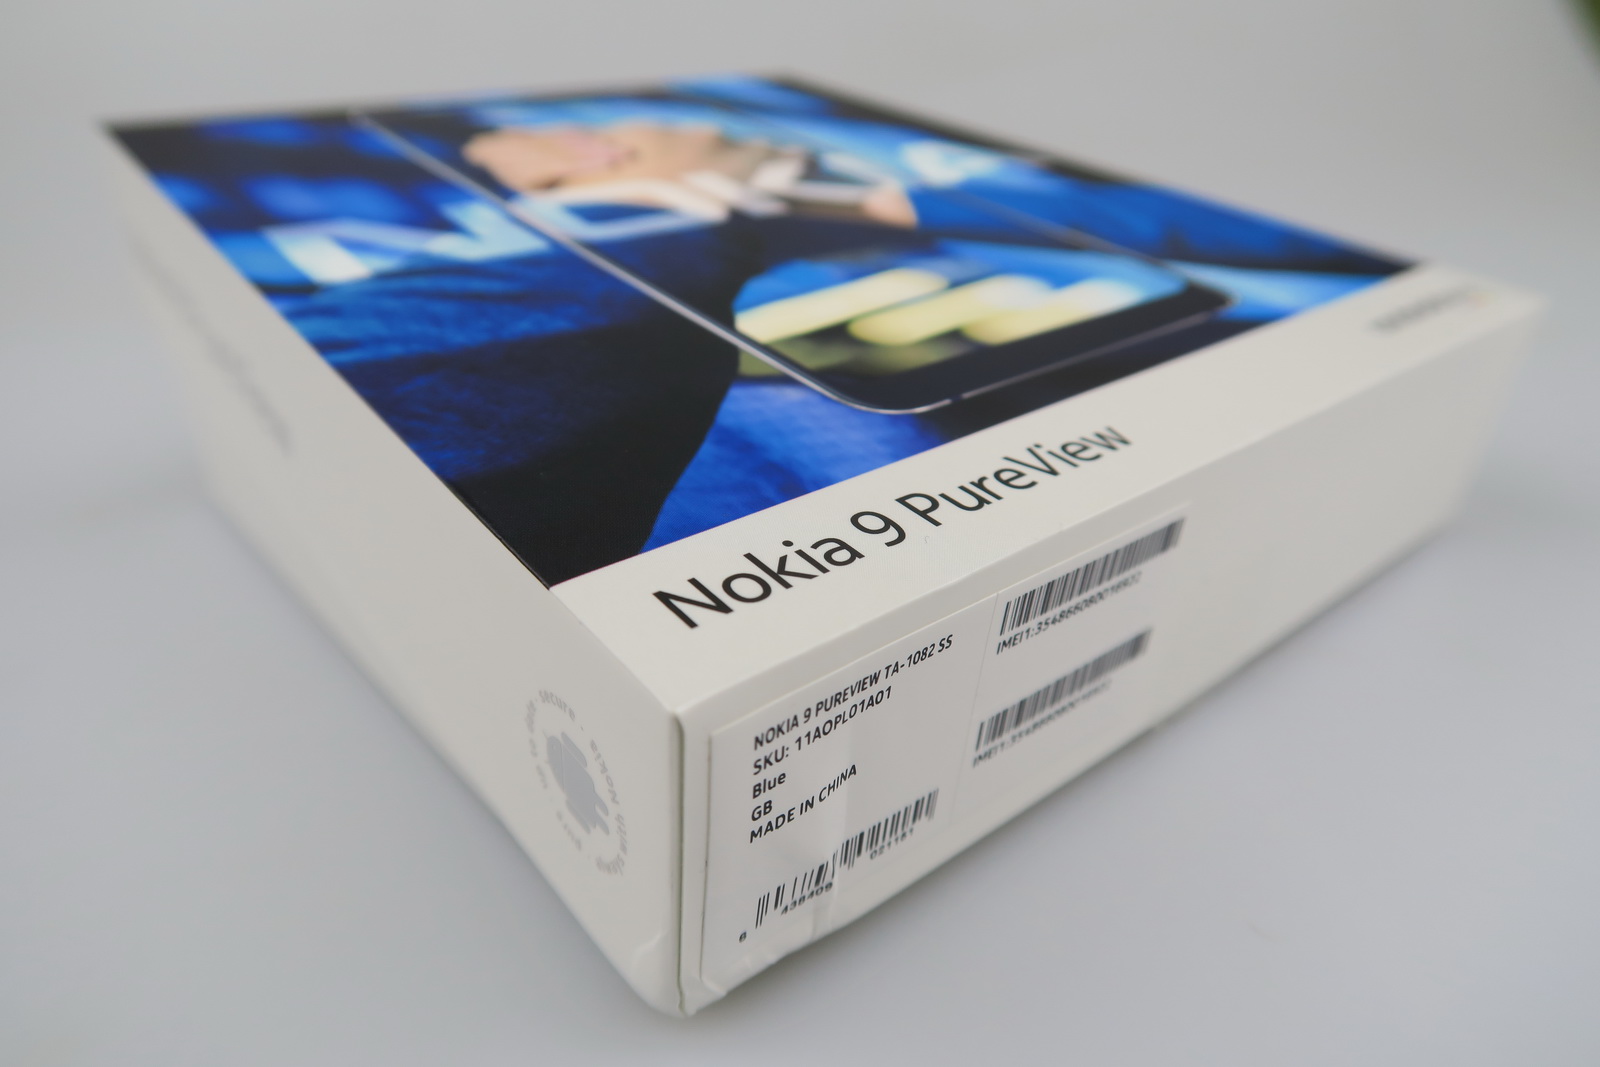 nokia-9-pureview-unboxing